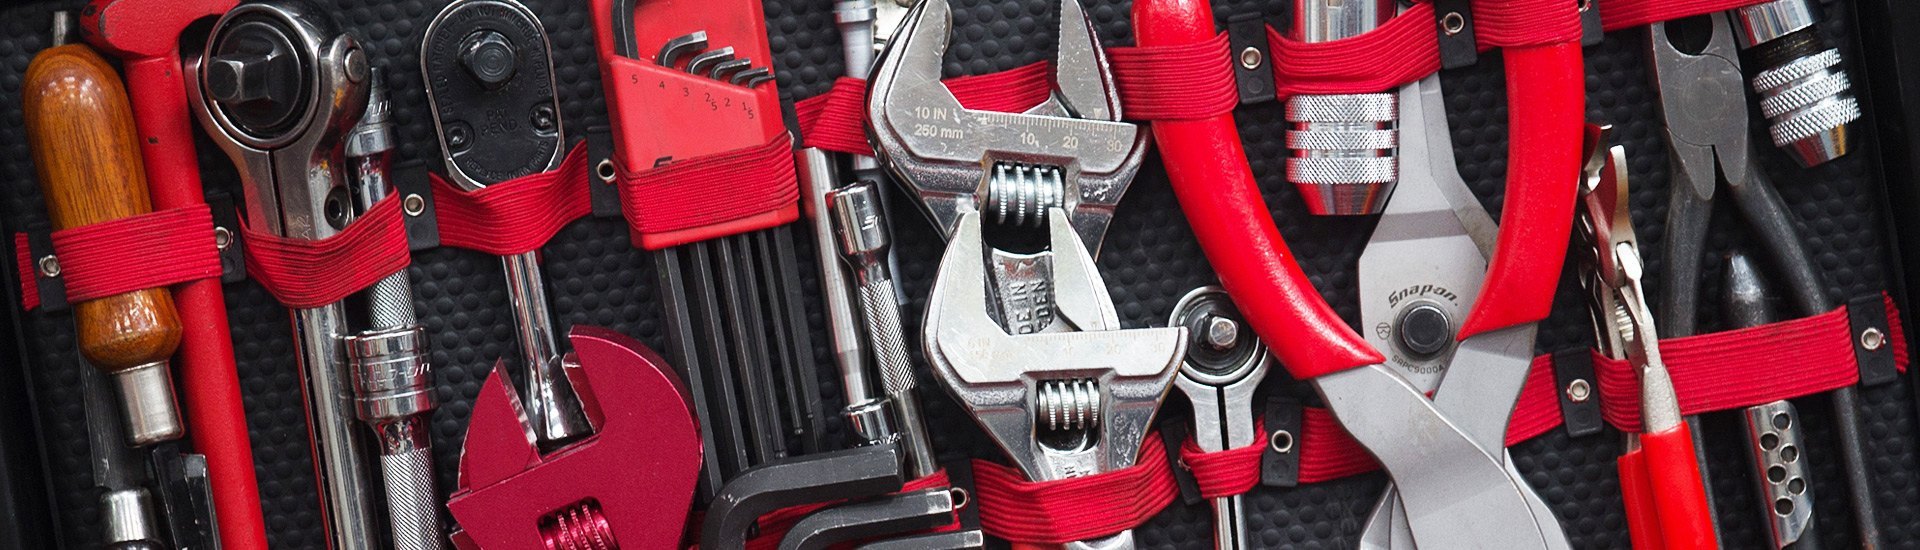 Which Are The Best Under-$200 Tool Sets For My Home Workshop?